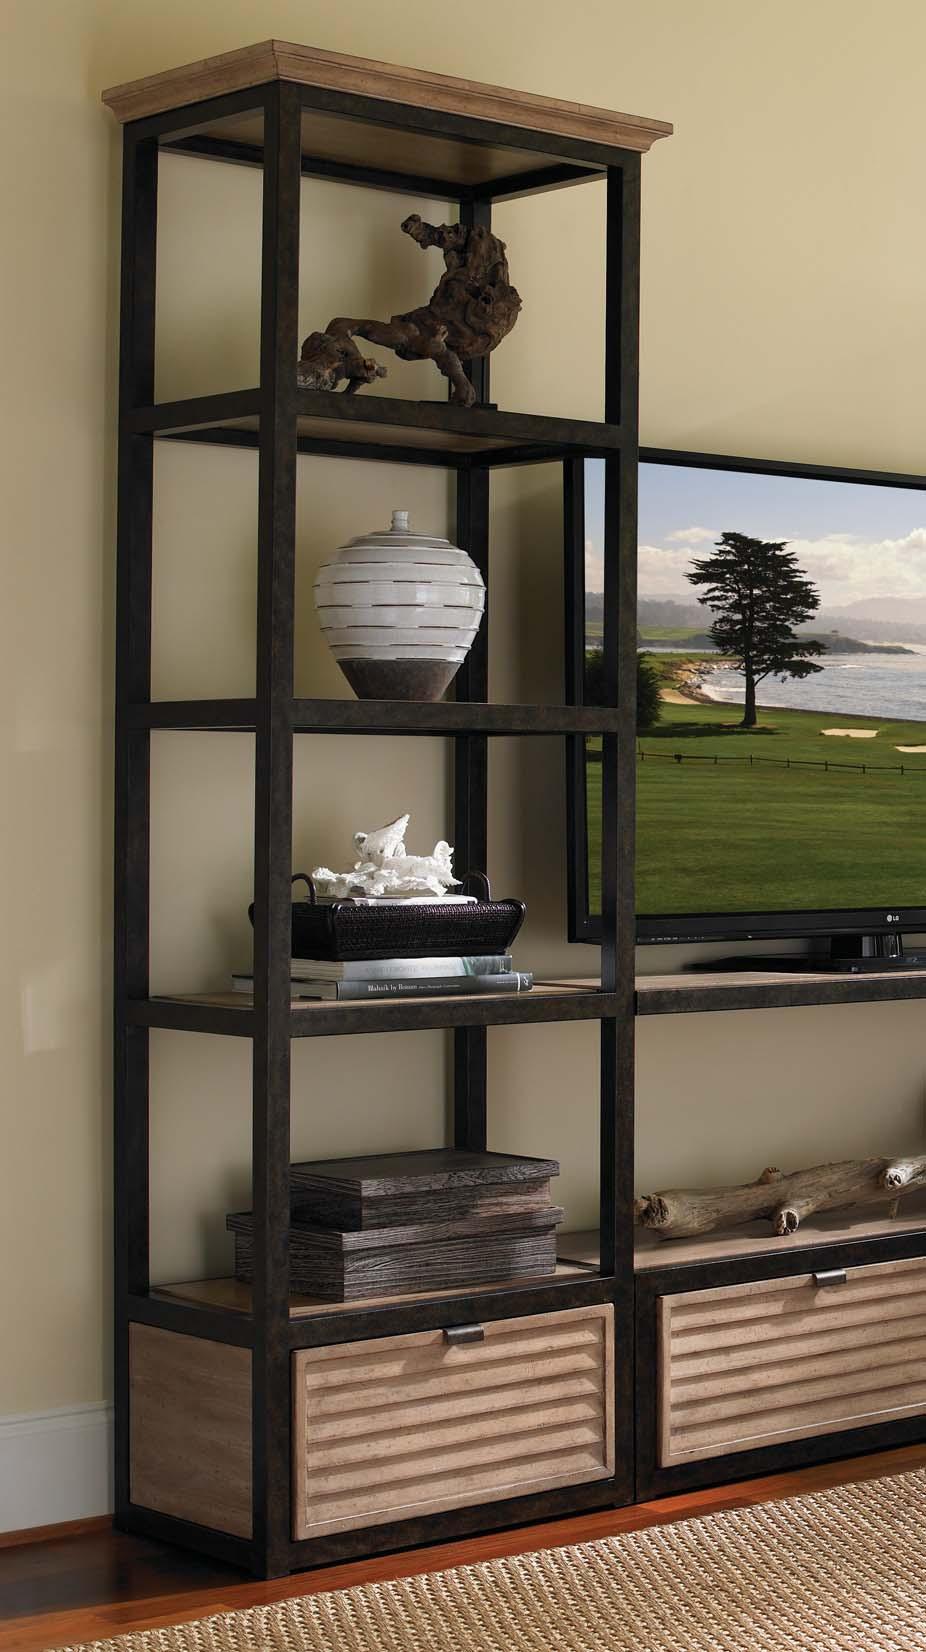 Make a contemporary design statement with this dramatic wall system, comprised of two Camino Real media towers, a 60 drawer unit in the center, and a shelf above it